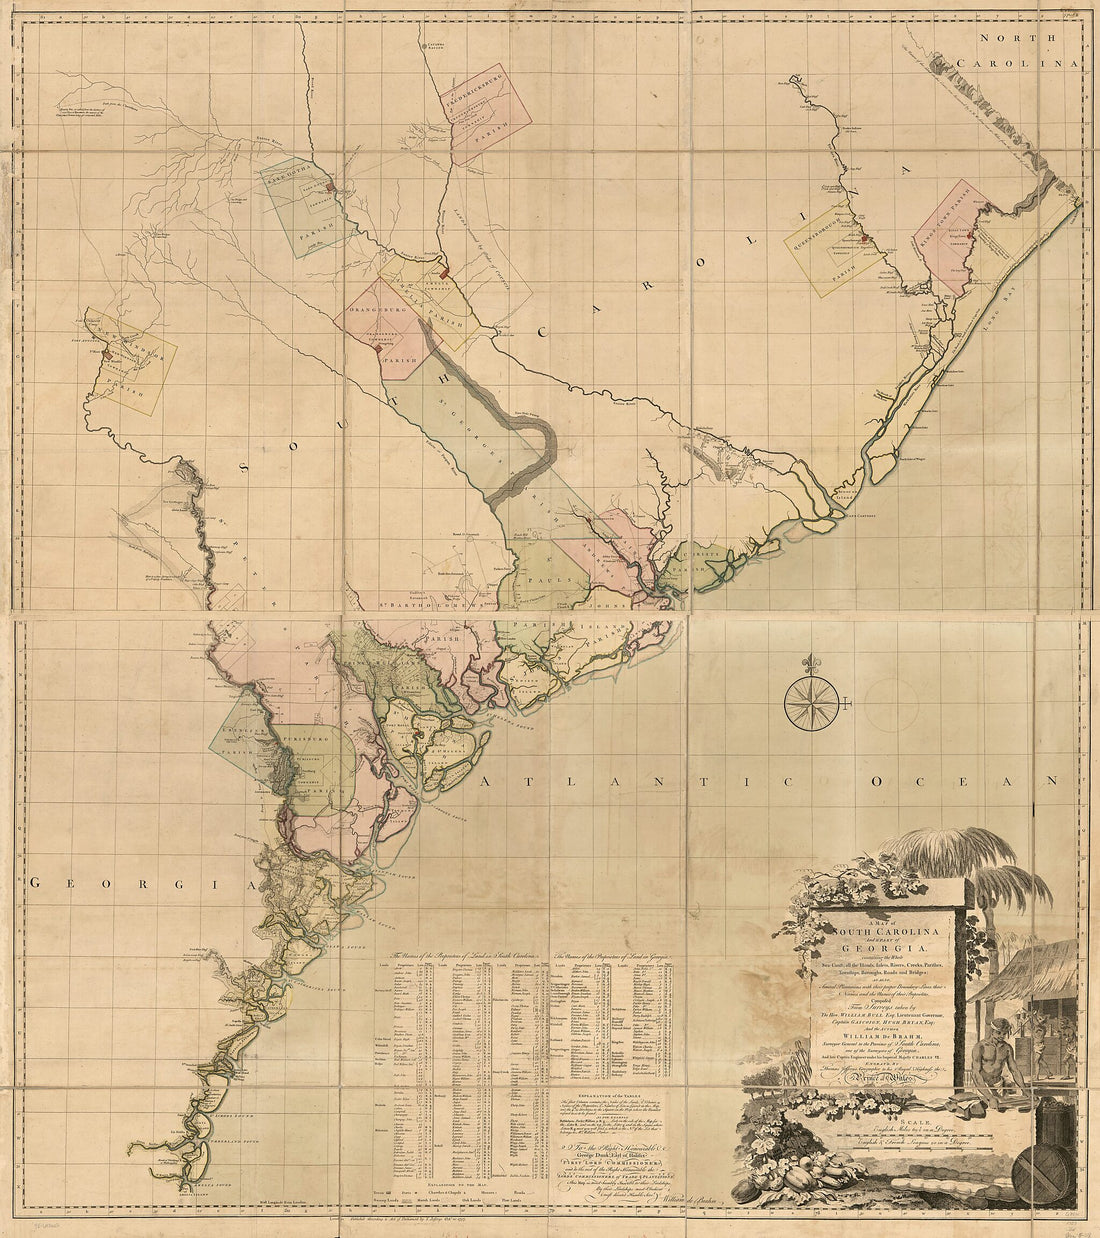 This old map of Coast; All the Islands, Inlets, Rivers, Creeks, Parishes, Townships, Boroughs, Roads, and Bridges; As Also, Several Plantations, With Their Proper Boundary-lines, Their Names, and the Names of Their Proprietors from 1757 was created by Wi